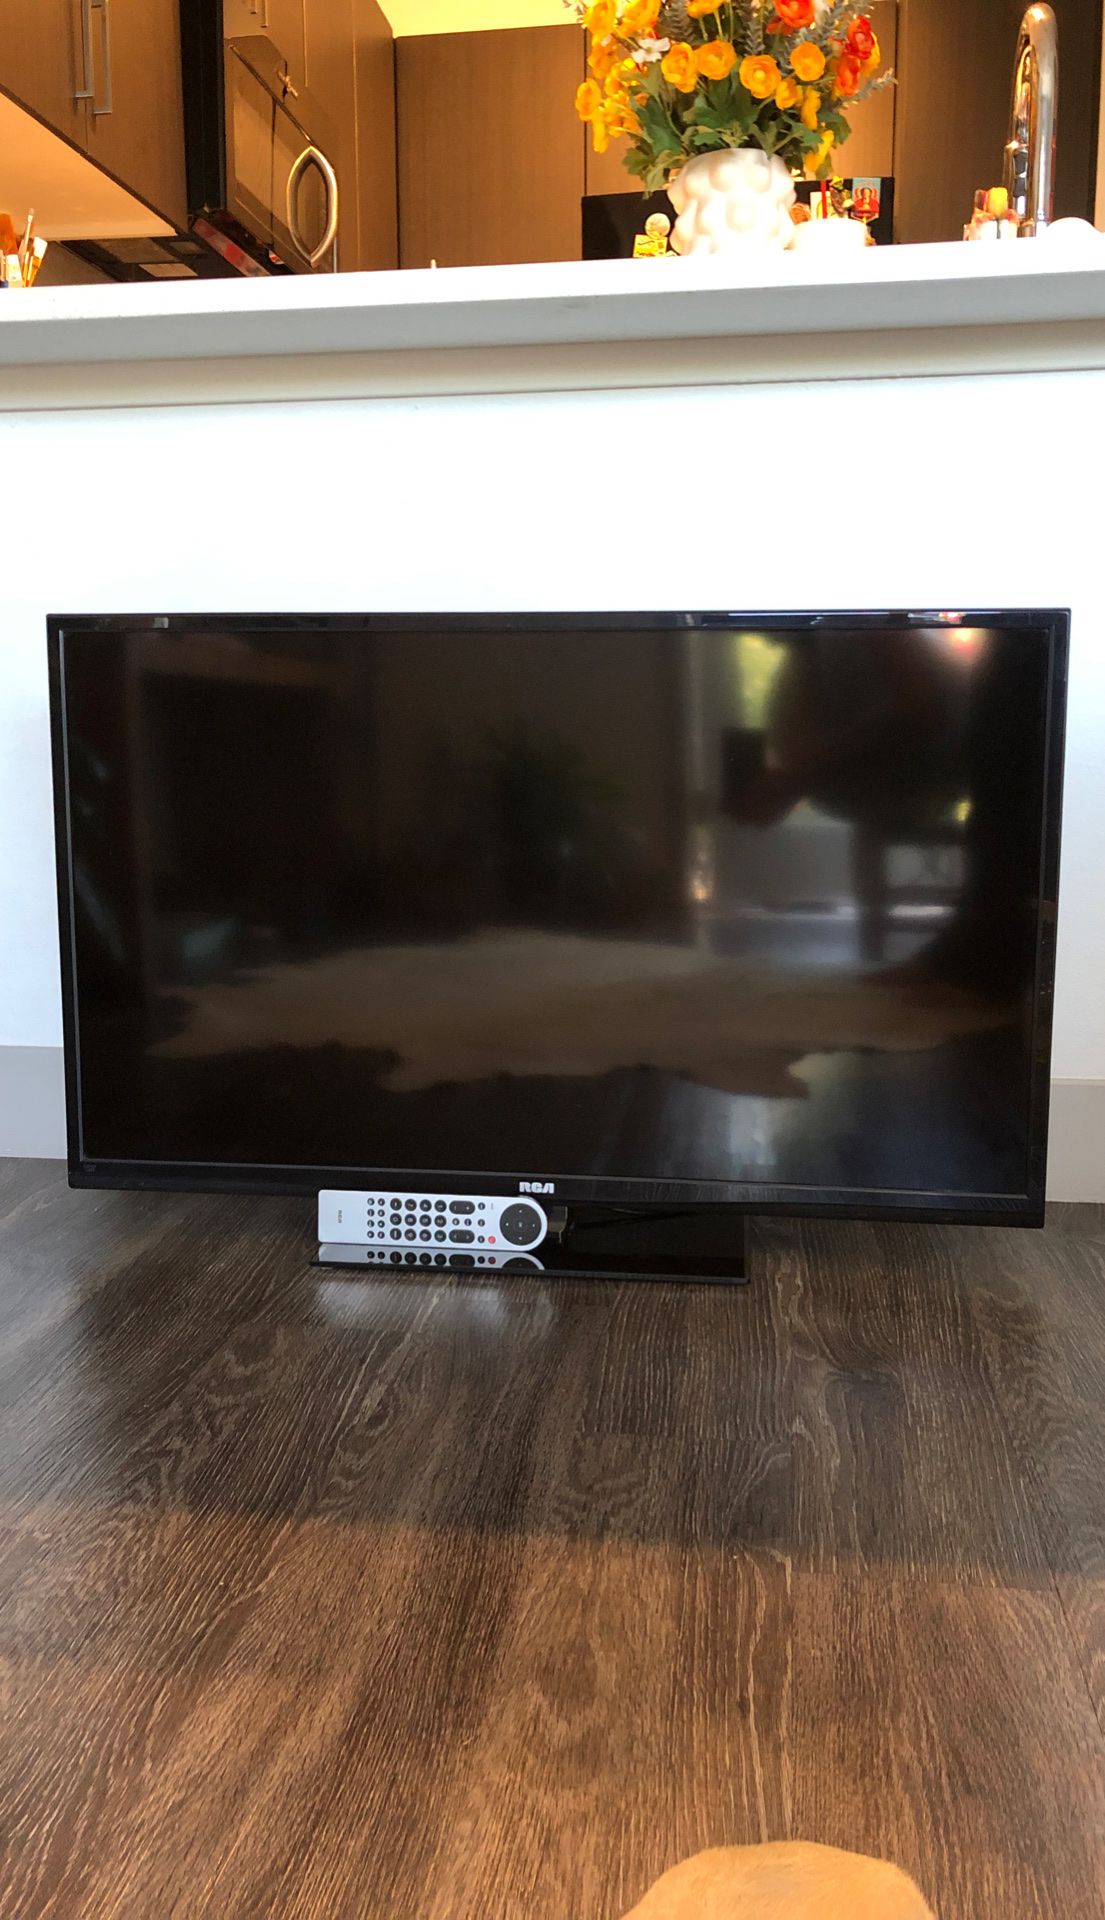 RCA 40” inch LED LCD HDTV Flat Screen TV Television with Remote HDMI Cable Antenna USB Component Headphone Audio Jack- $70 OBO